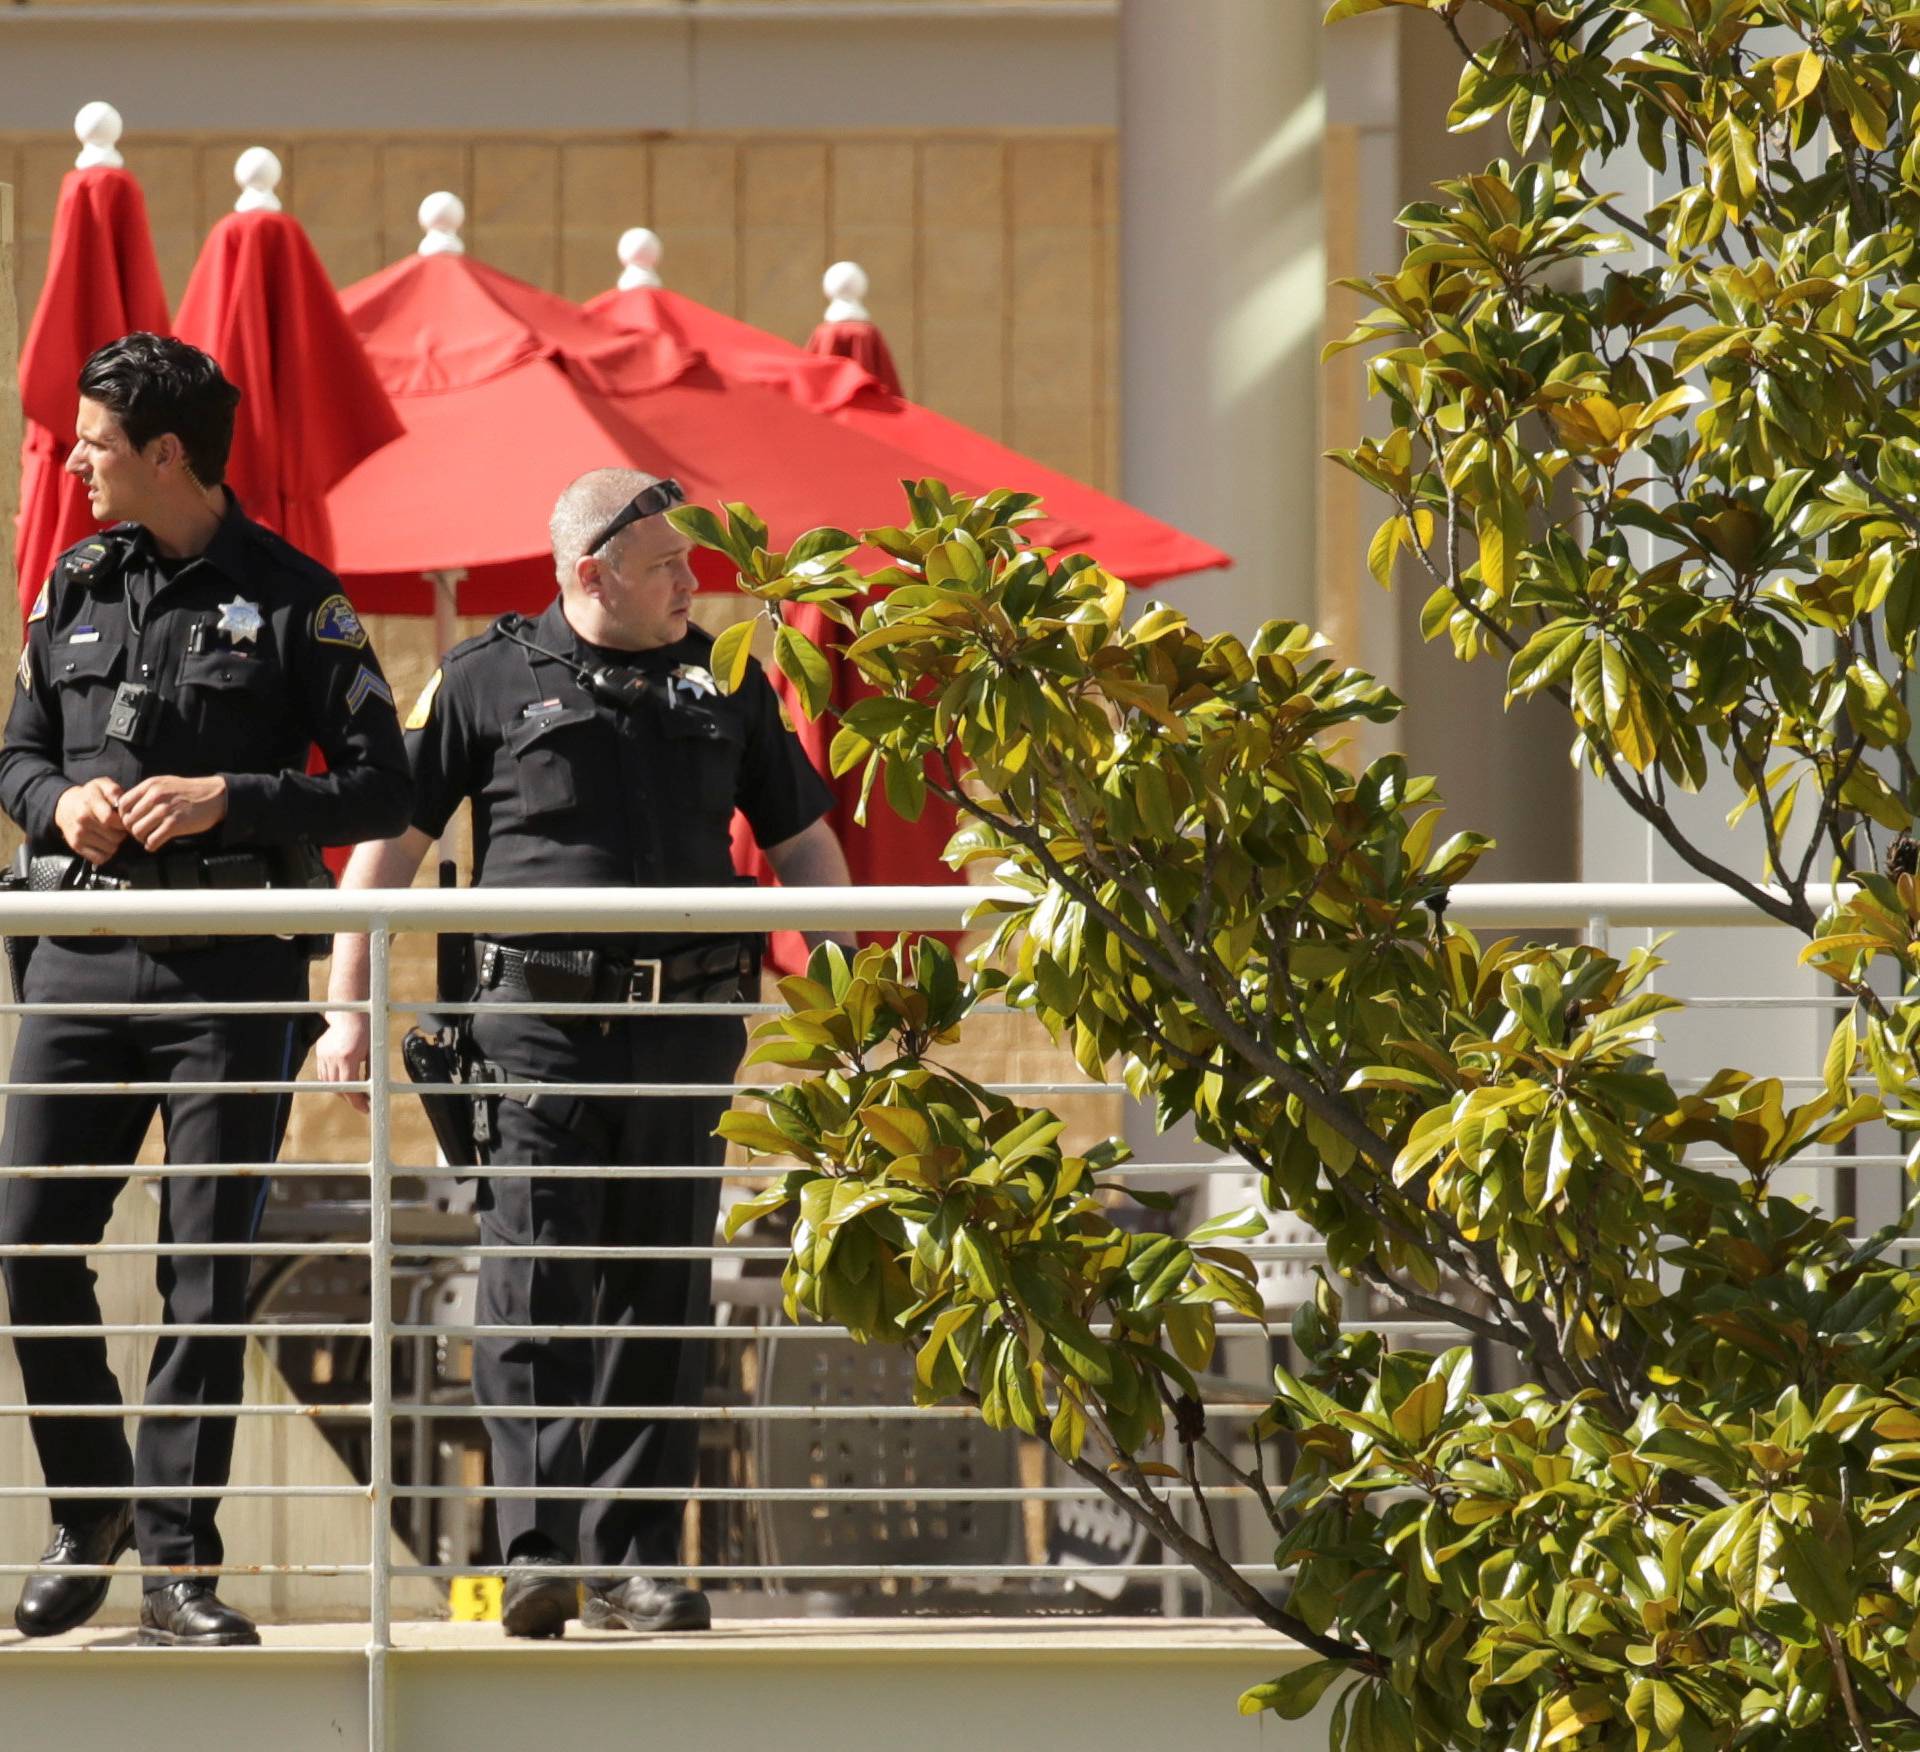 Police officers and crime scene markers are seen at Youtube headquarters following an active shooter situation in San Bruno, California